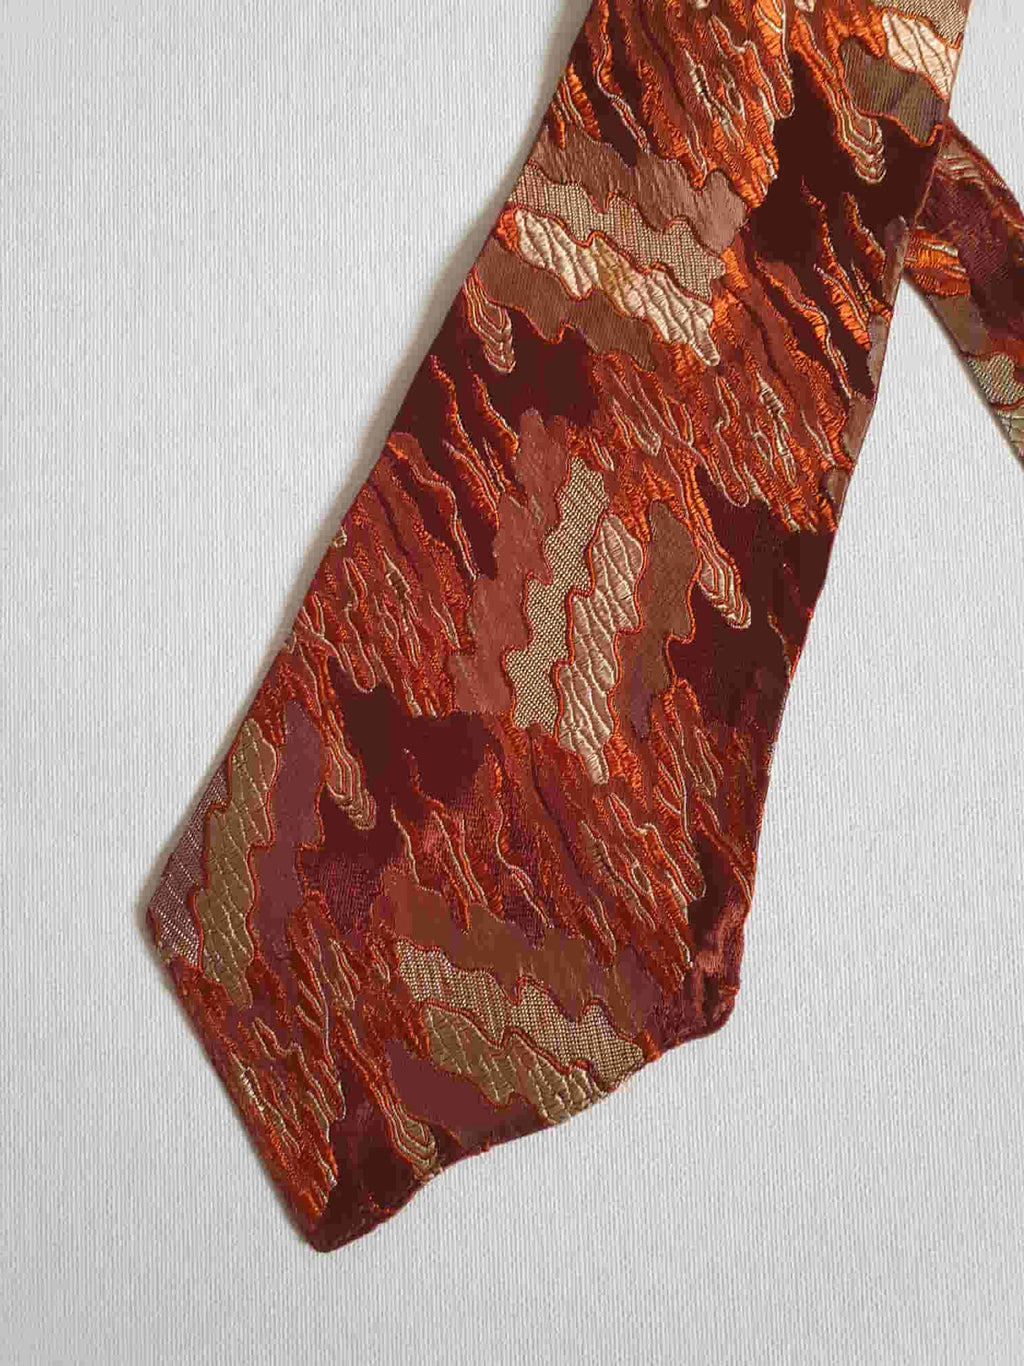 1940s vintage copper and bronze metallic tie by beaucaire